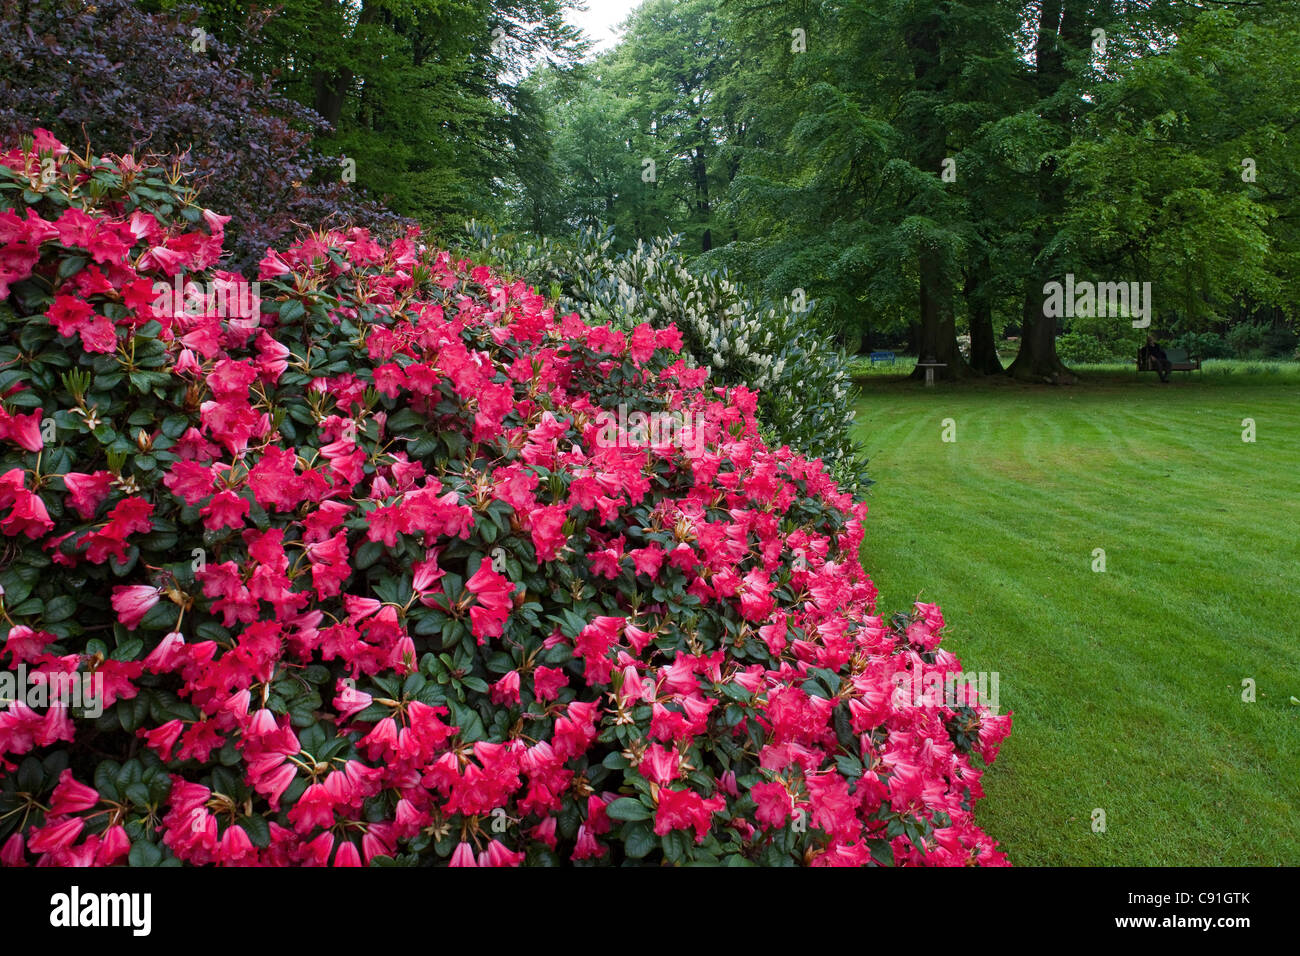 Flowering rhododendrons in a private garden von Duering, Horneburg, Lower saxony, Germany Stock Photo